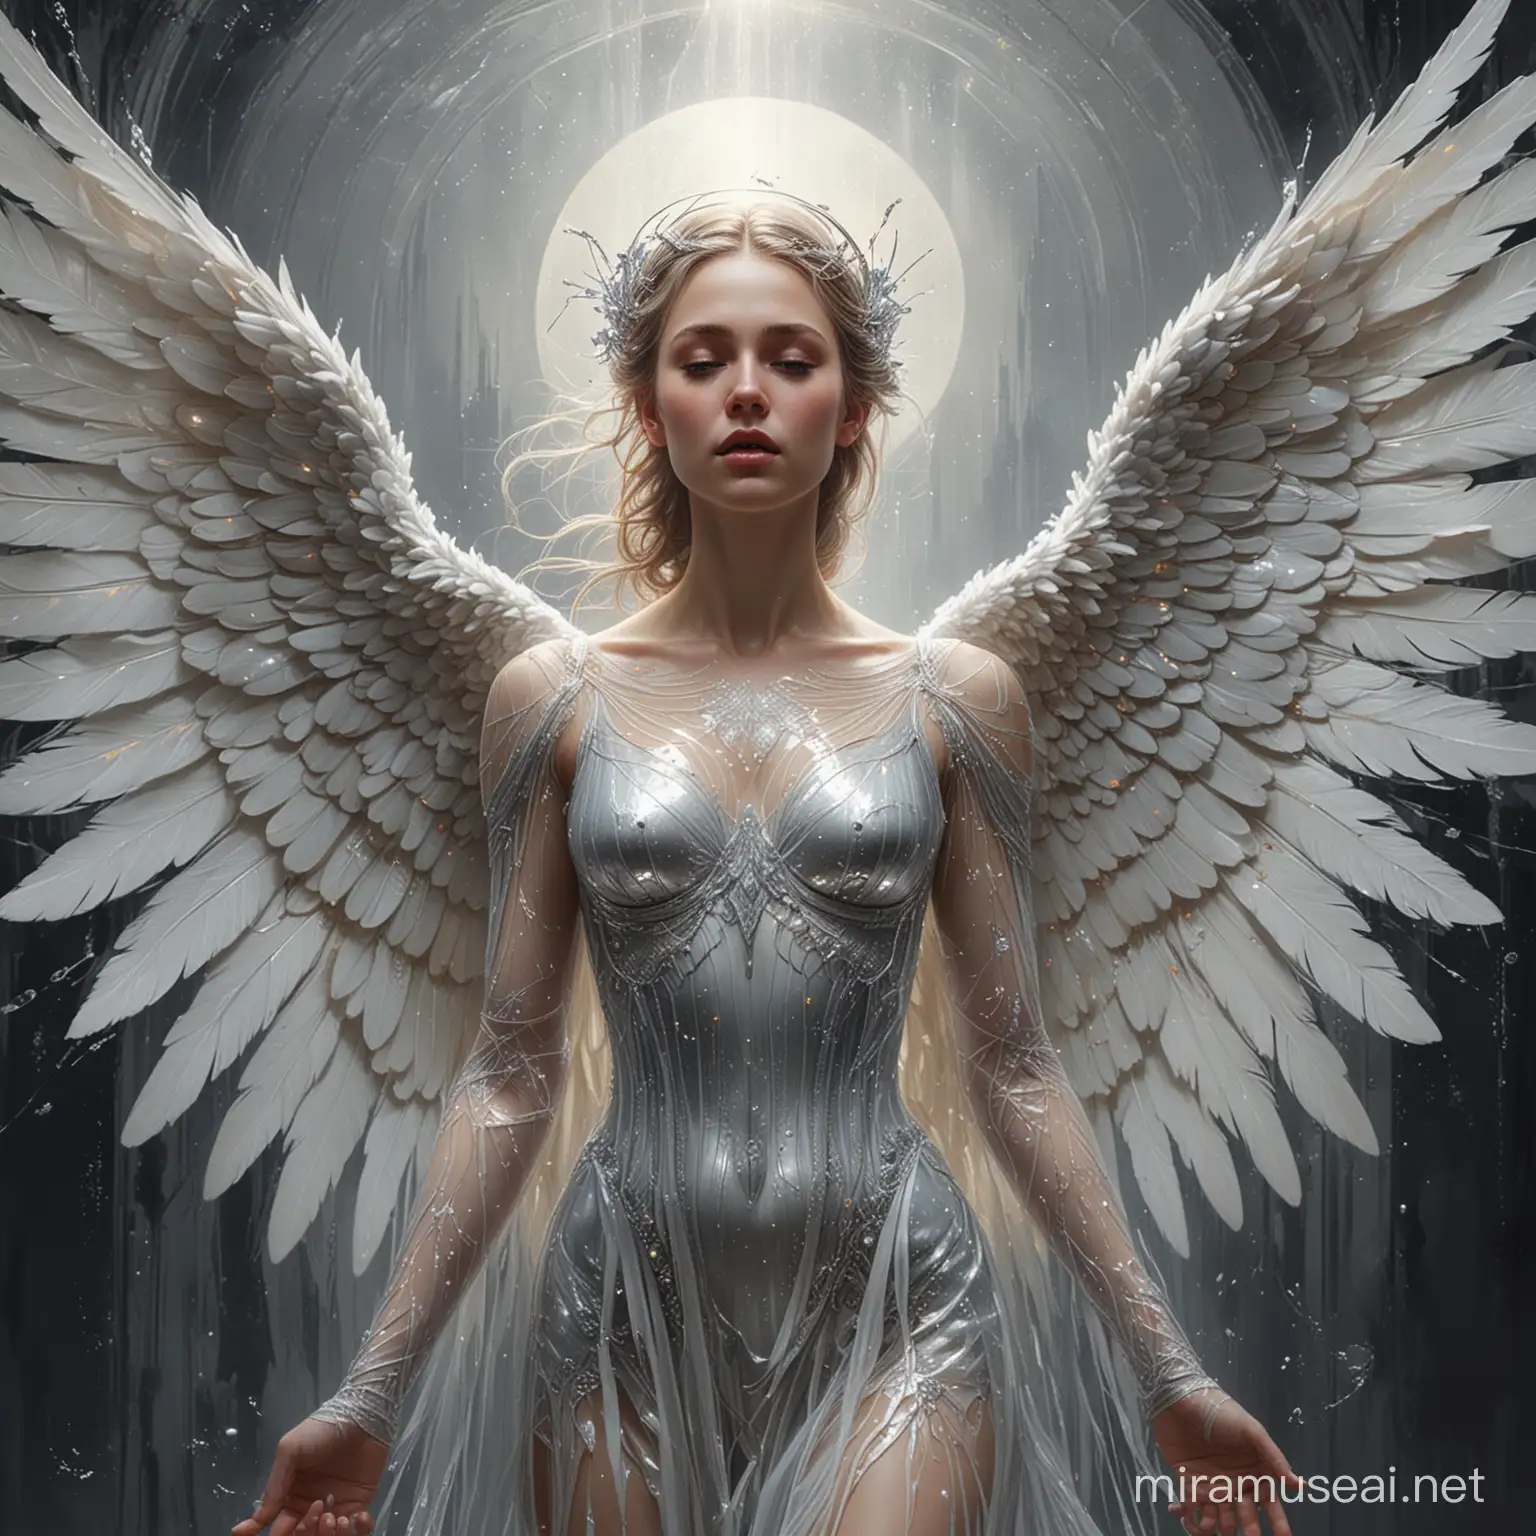 Ethereal Angel in Agony A Futuristic Oil Painting